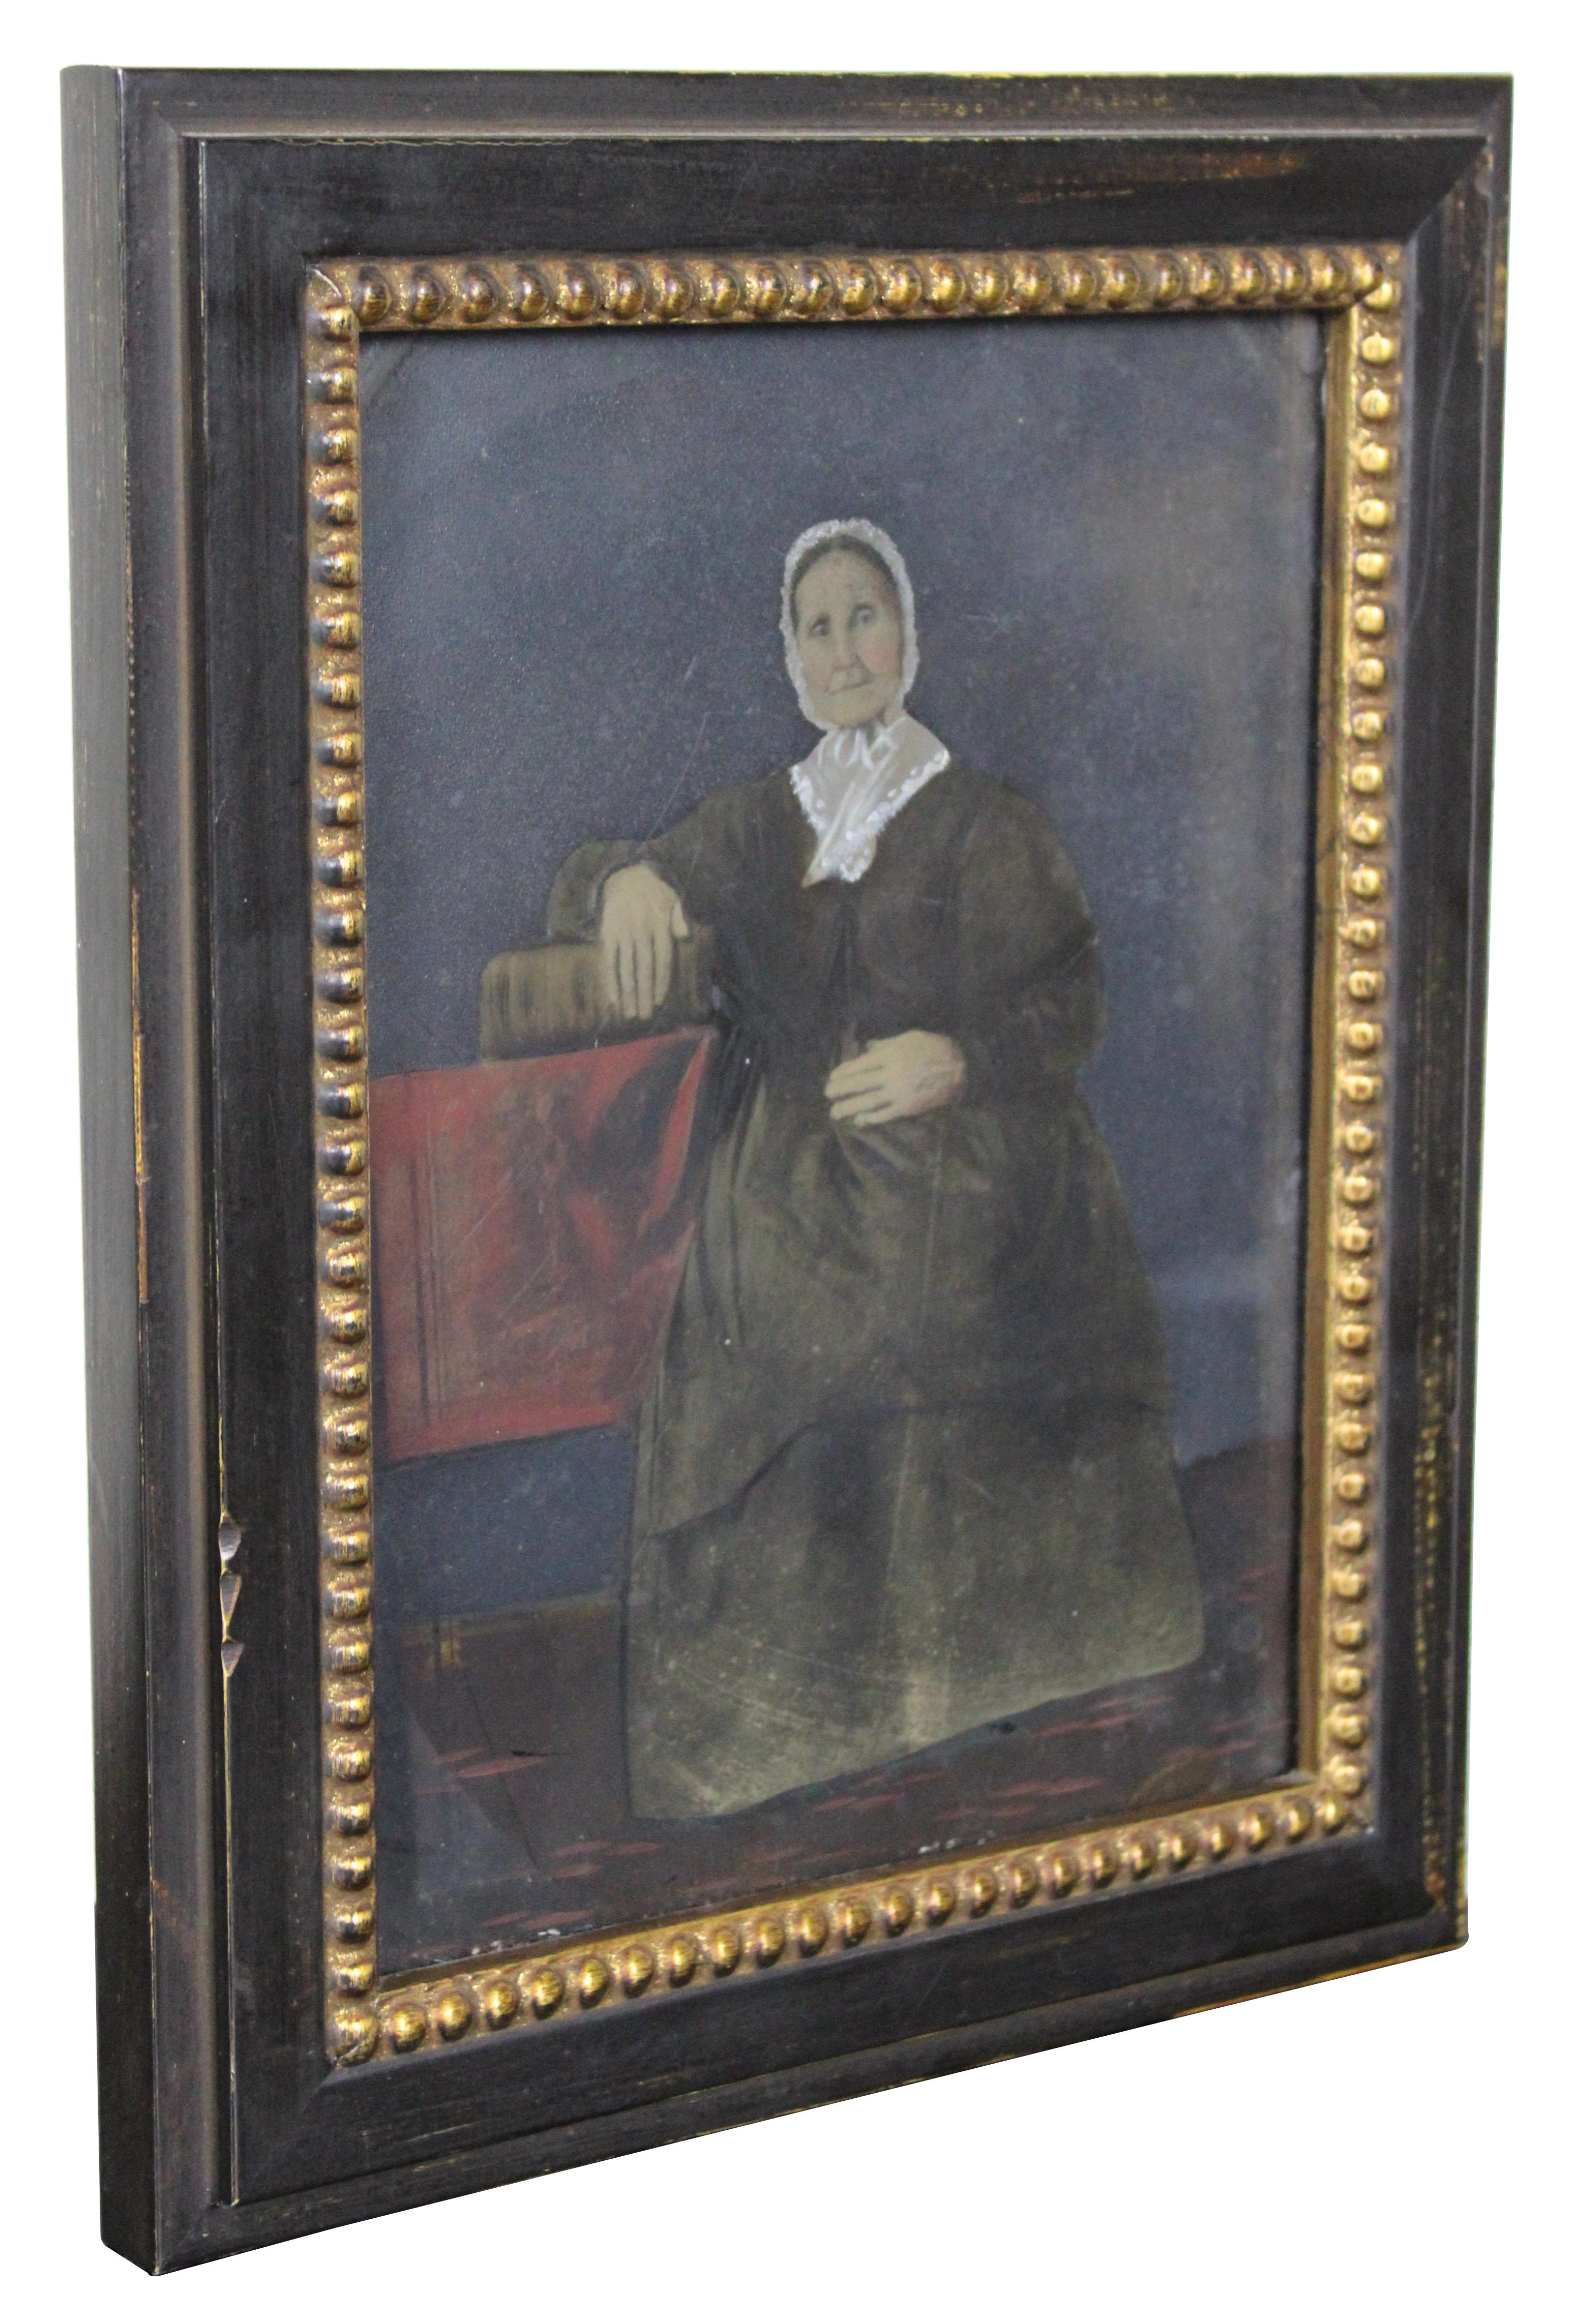 Fine antique oil painting on tin. A portrait painting of an elderly woman in black with a lace fichu bonnet seated at a table with her hand on a book.

Measures: 8.5” x 0.75” x 10.5” / Sans Frame - 6” x 8” (Width x Depth x Height).